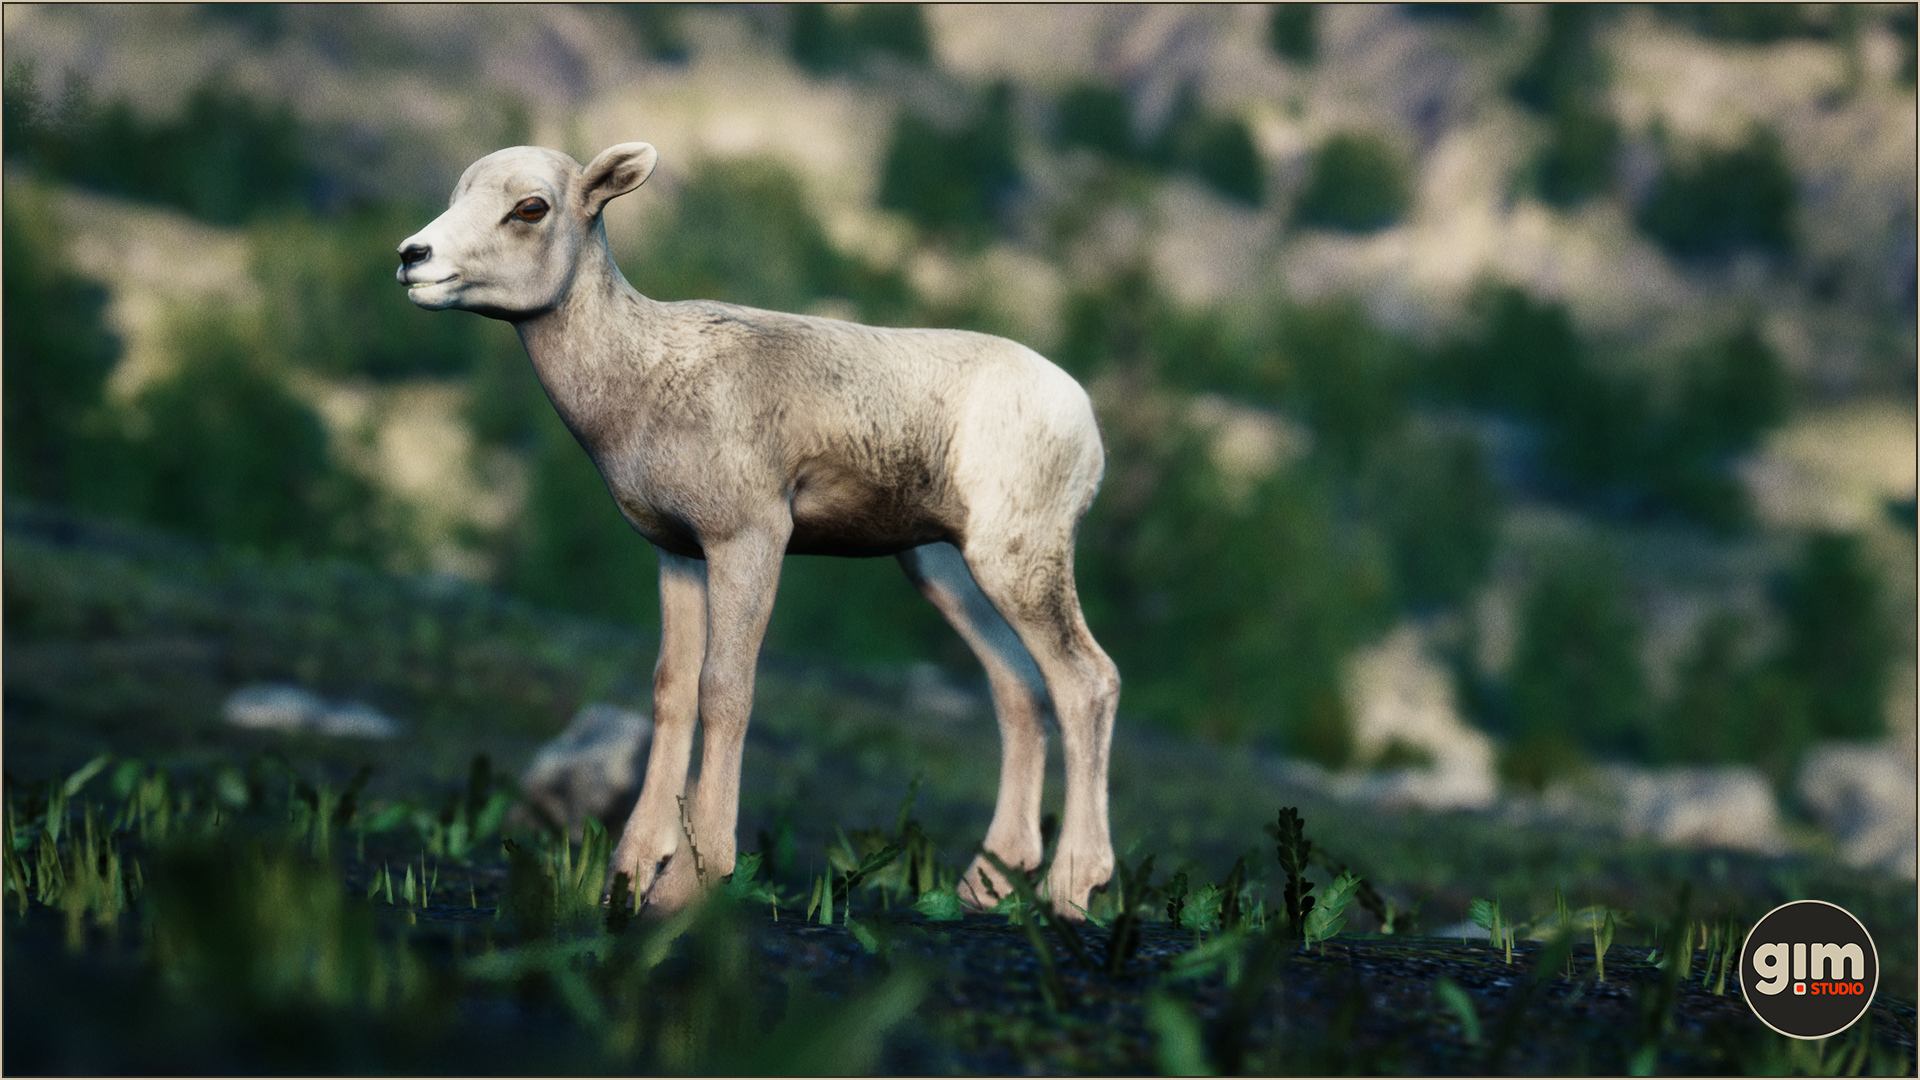 Young Bighorn Sheep waiting for the schoolbus